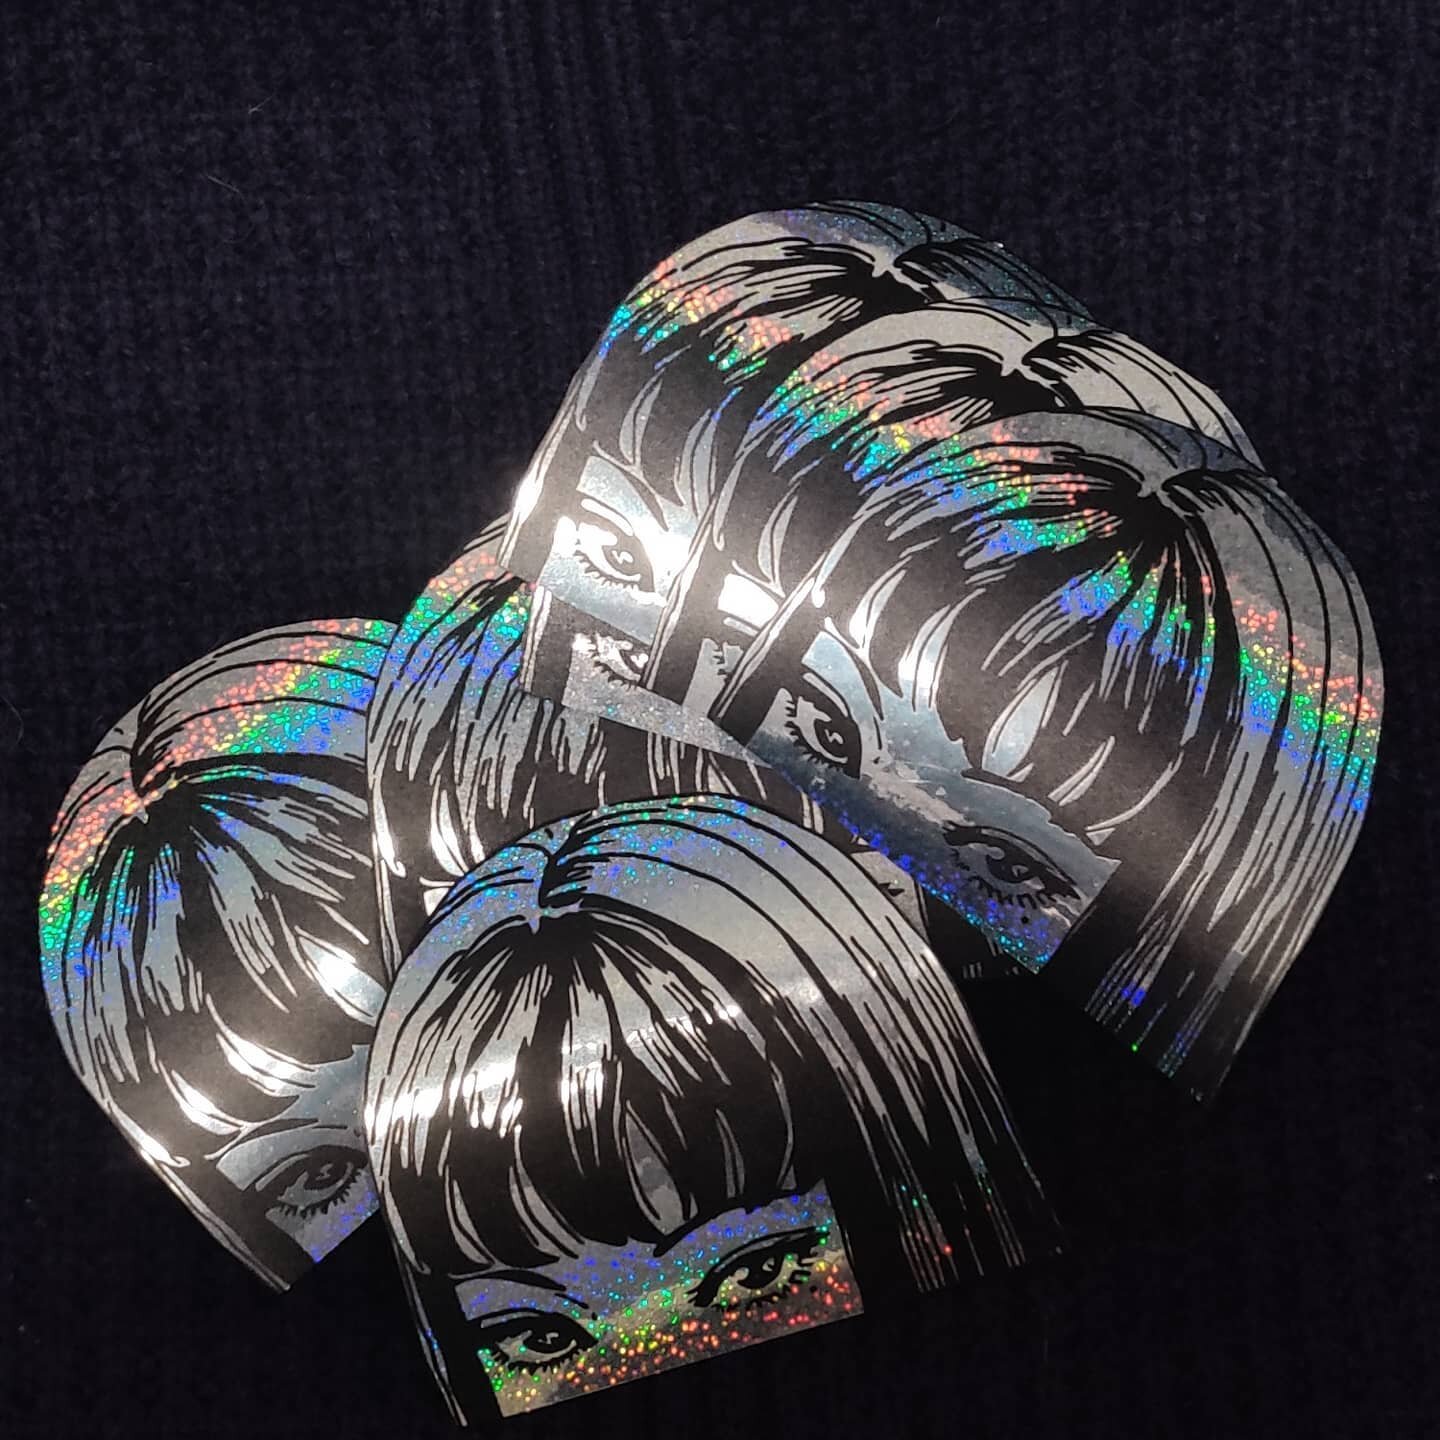 New Tomie Glitter Sparkle decal material !🔥🔥 

We're working on some new designs for you guys, as well as getting the previous holo designs redone with better UV resistance like these.

These will be replacing the previous holographic sparkle which